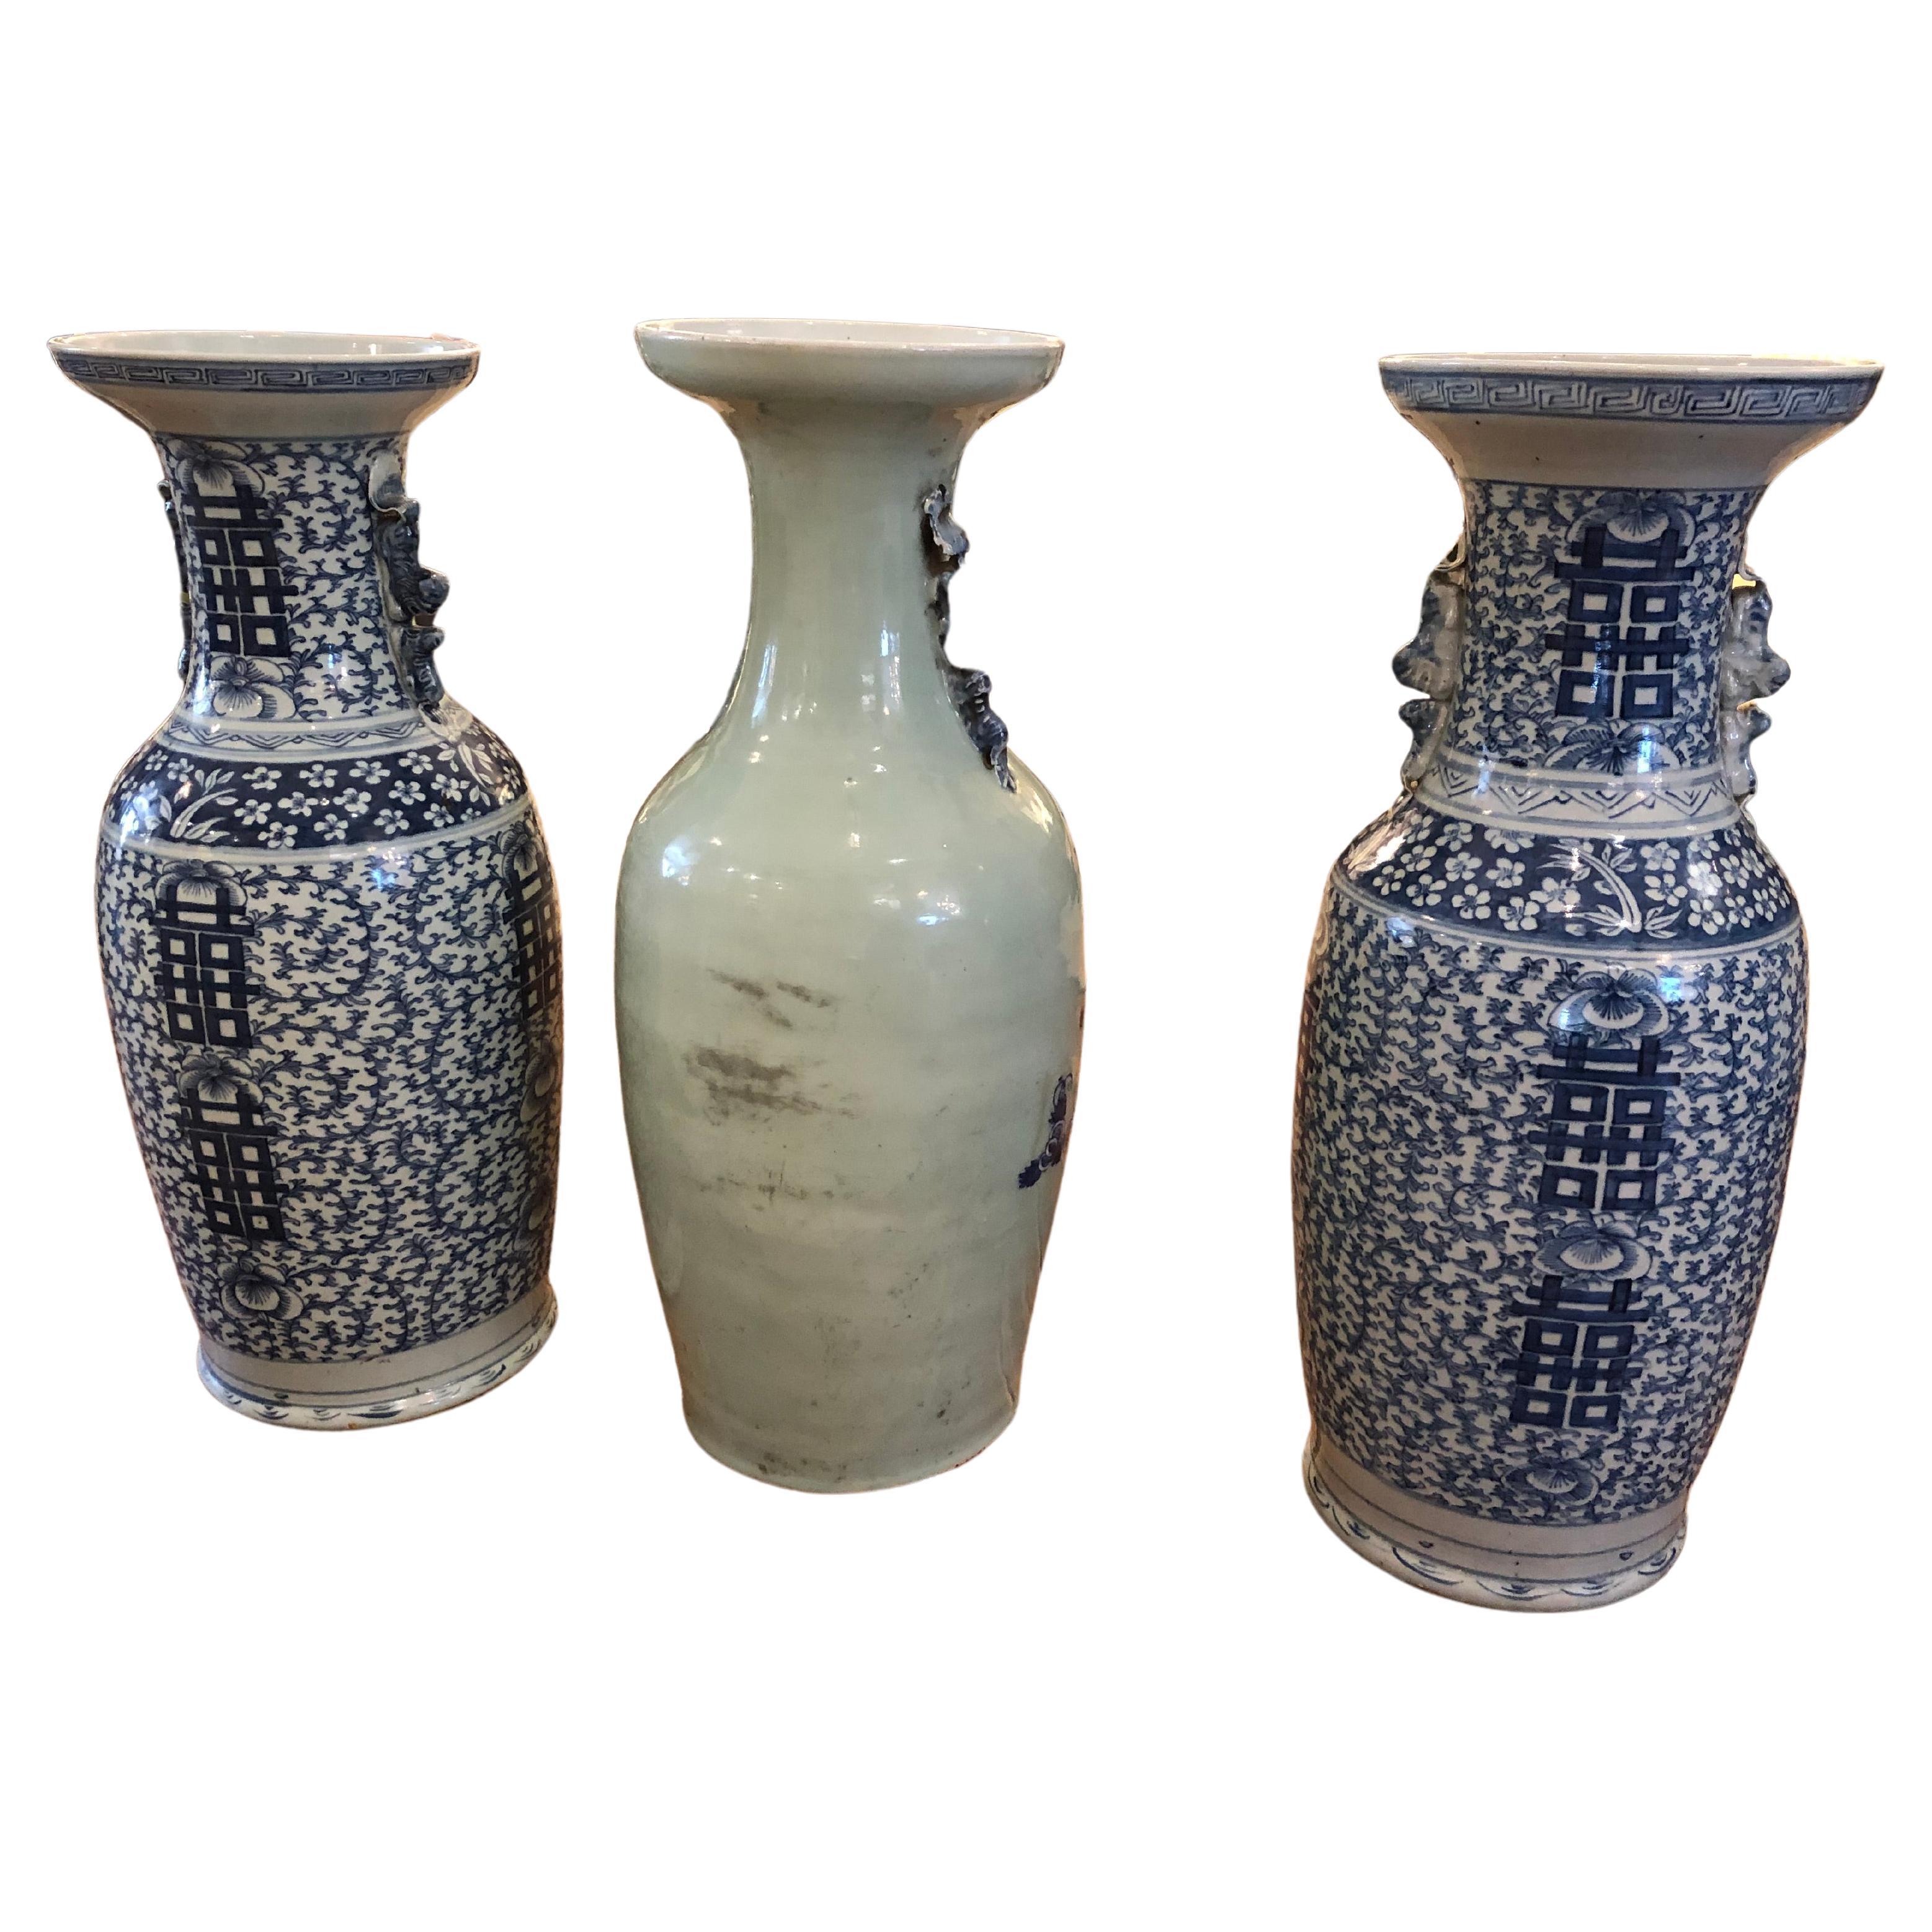 An antique collection of 3 very large blue and white Chinese vases, two are a pair but not exactly alike. Beautiful decoration and side handles. The pair are slightly shorter and smaller than the single vase measuring 23.5 h 8 diameter at the top,